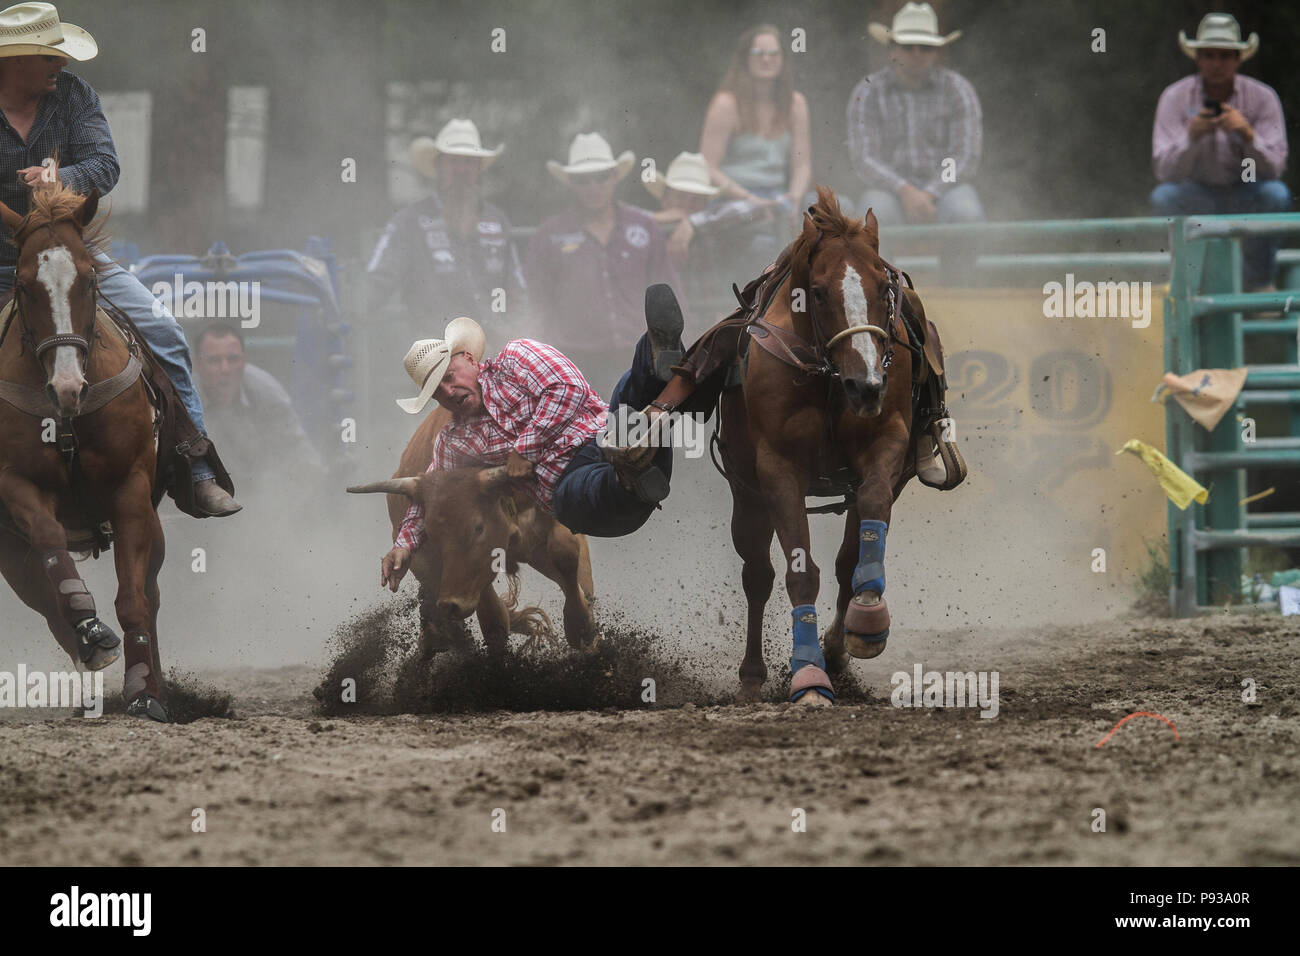 Steer Wrestling, get down and in the dirt. Exciting rodeo event, man vs steer. Action packed, jumps from movng horse to wrestle steer to ground. Bo An Stock Photo